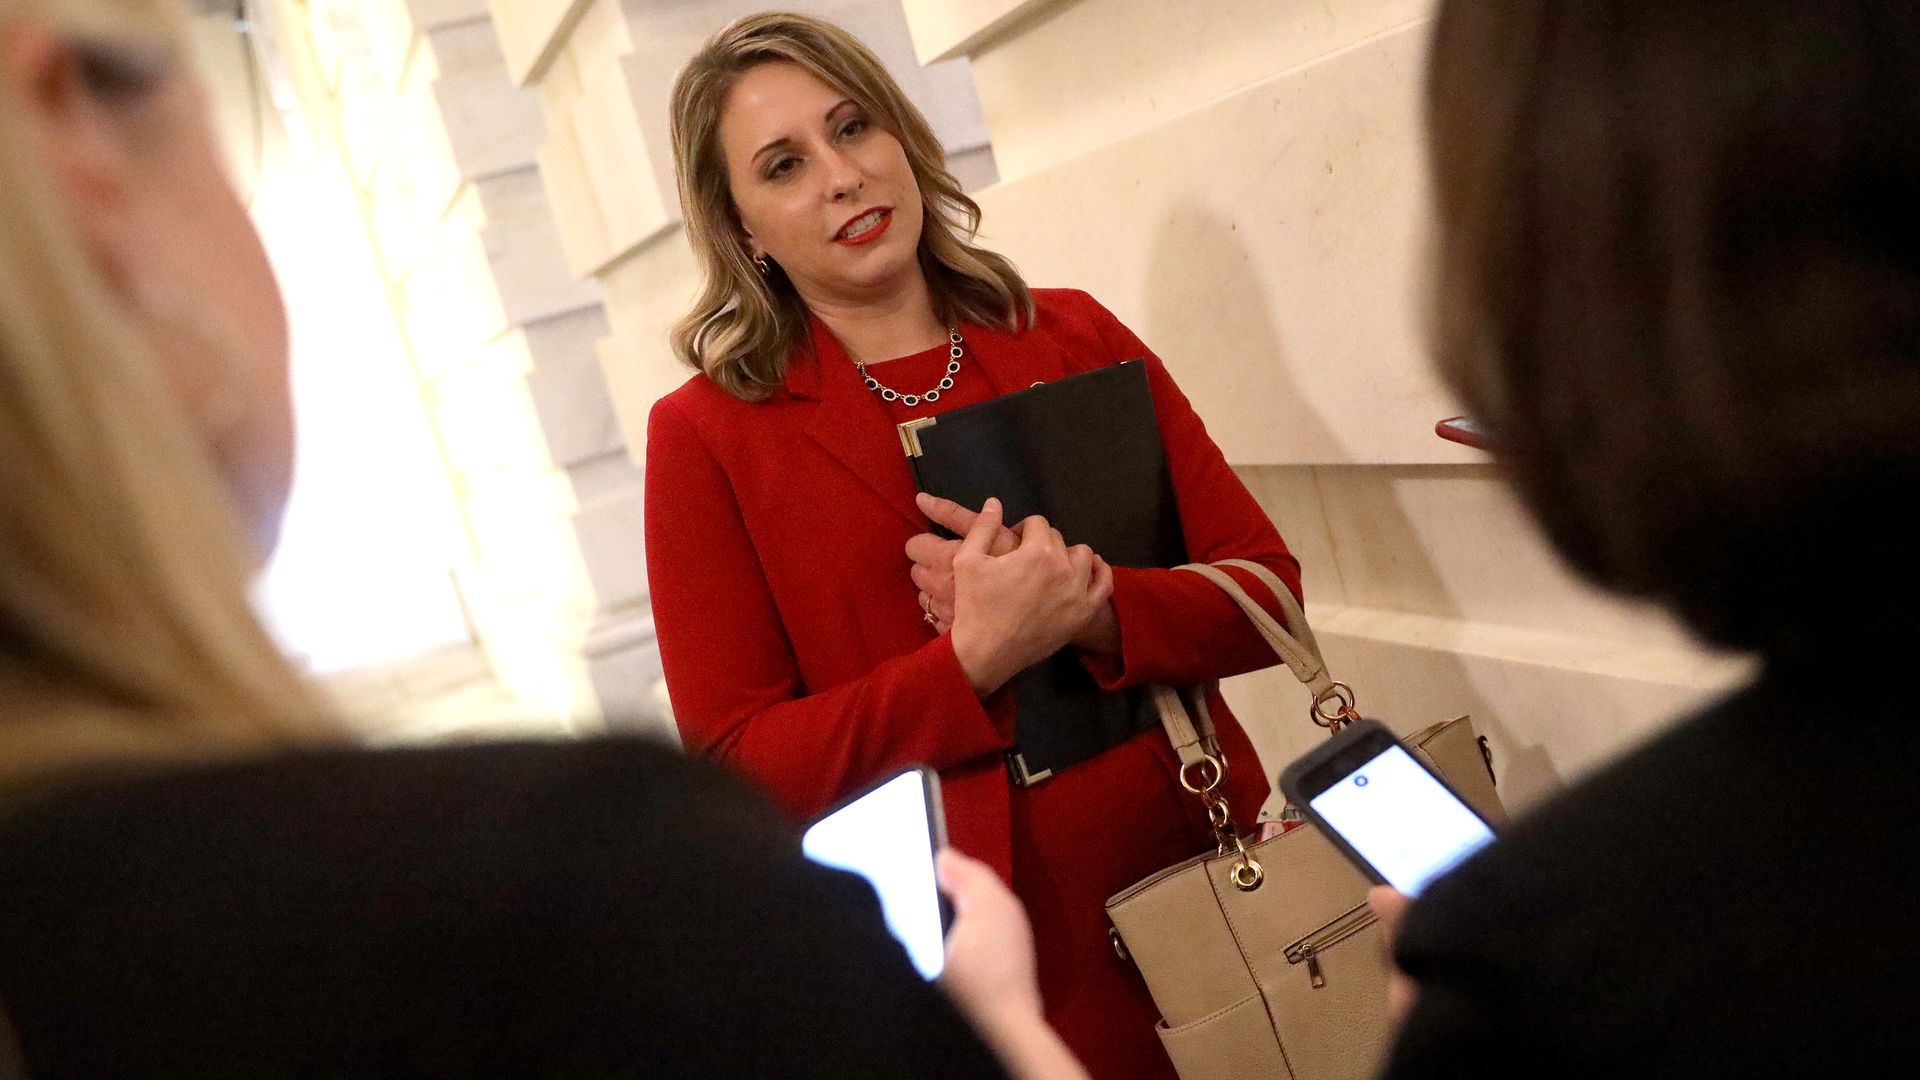 Katie Hill speaks to reporters while holding a binder